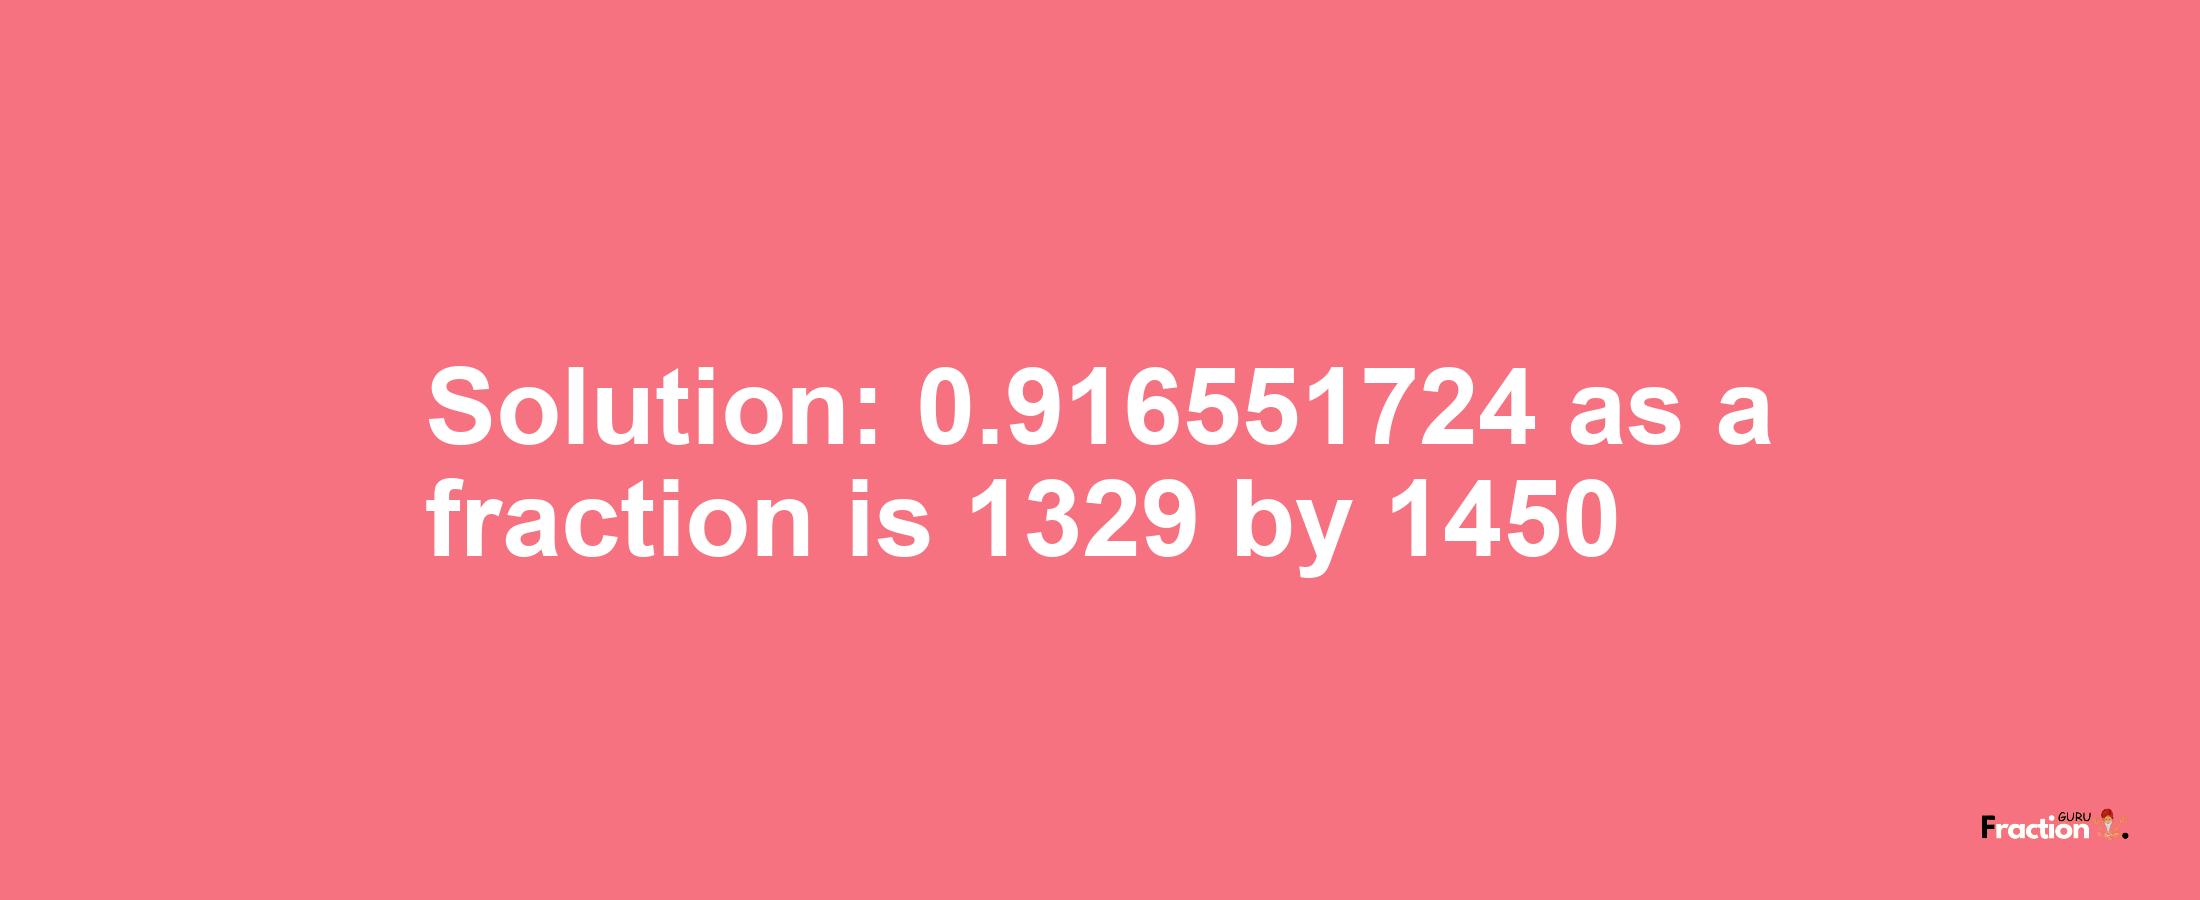 Solution:0.916551724 as a fraction is 1329/1450